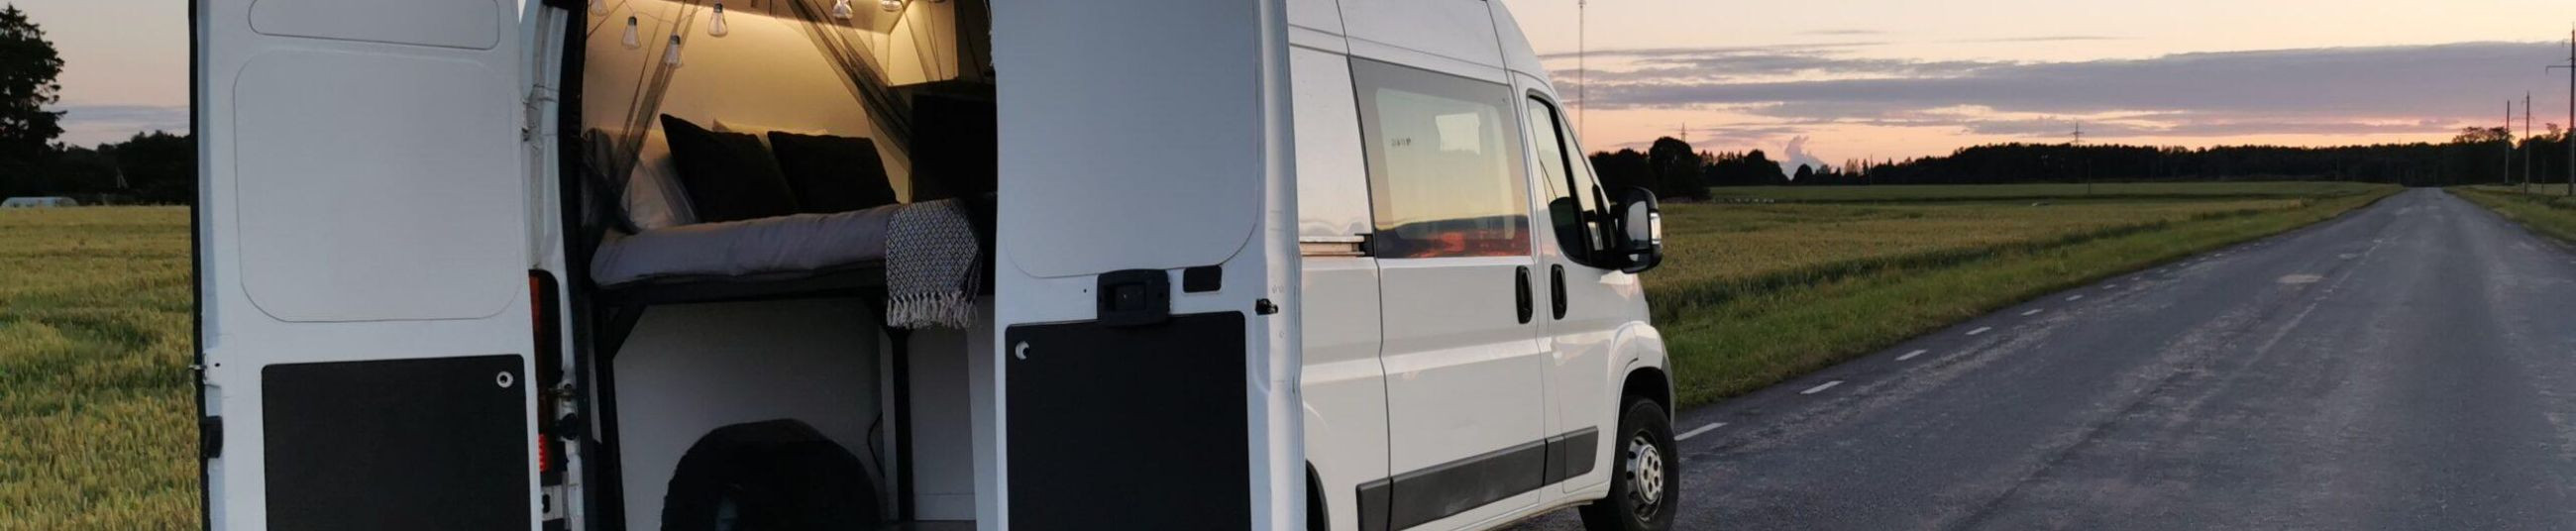 We specialize in the installation of accessories and additional equipment for hiking cars and vans.